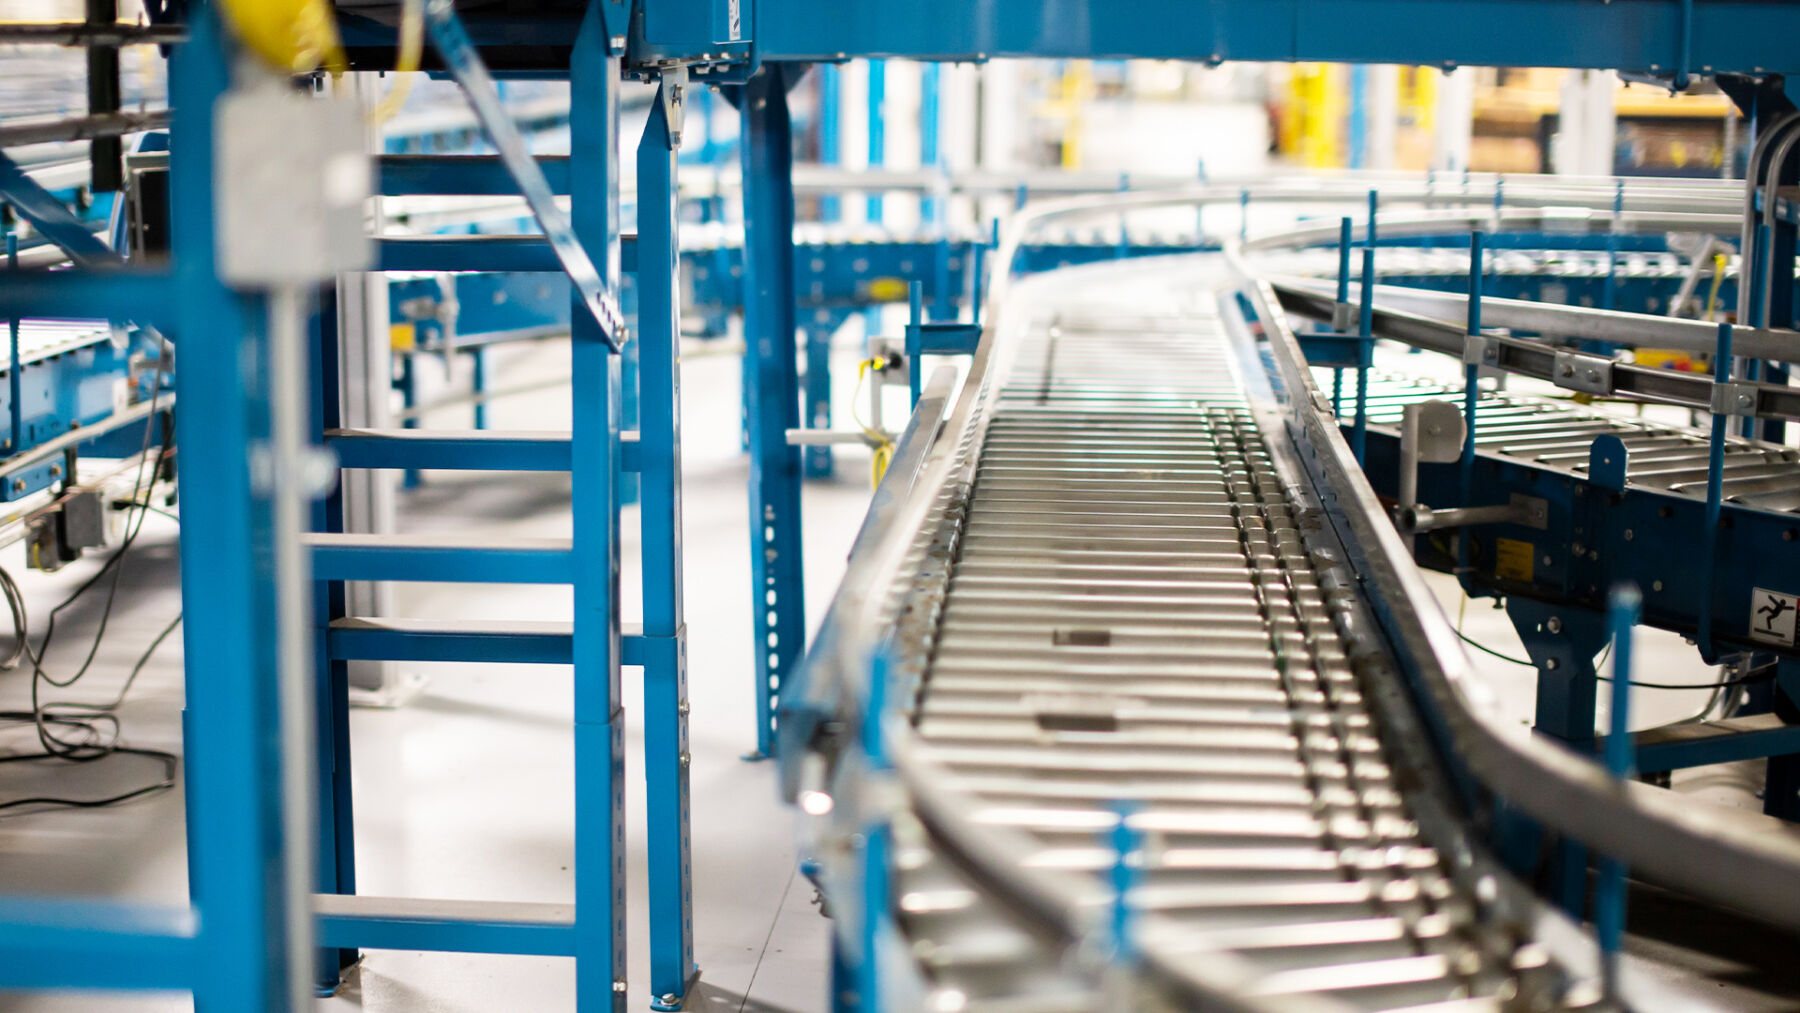 conveyor belt in a manufacturing facility